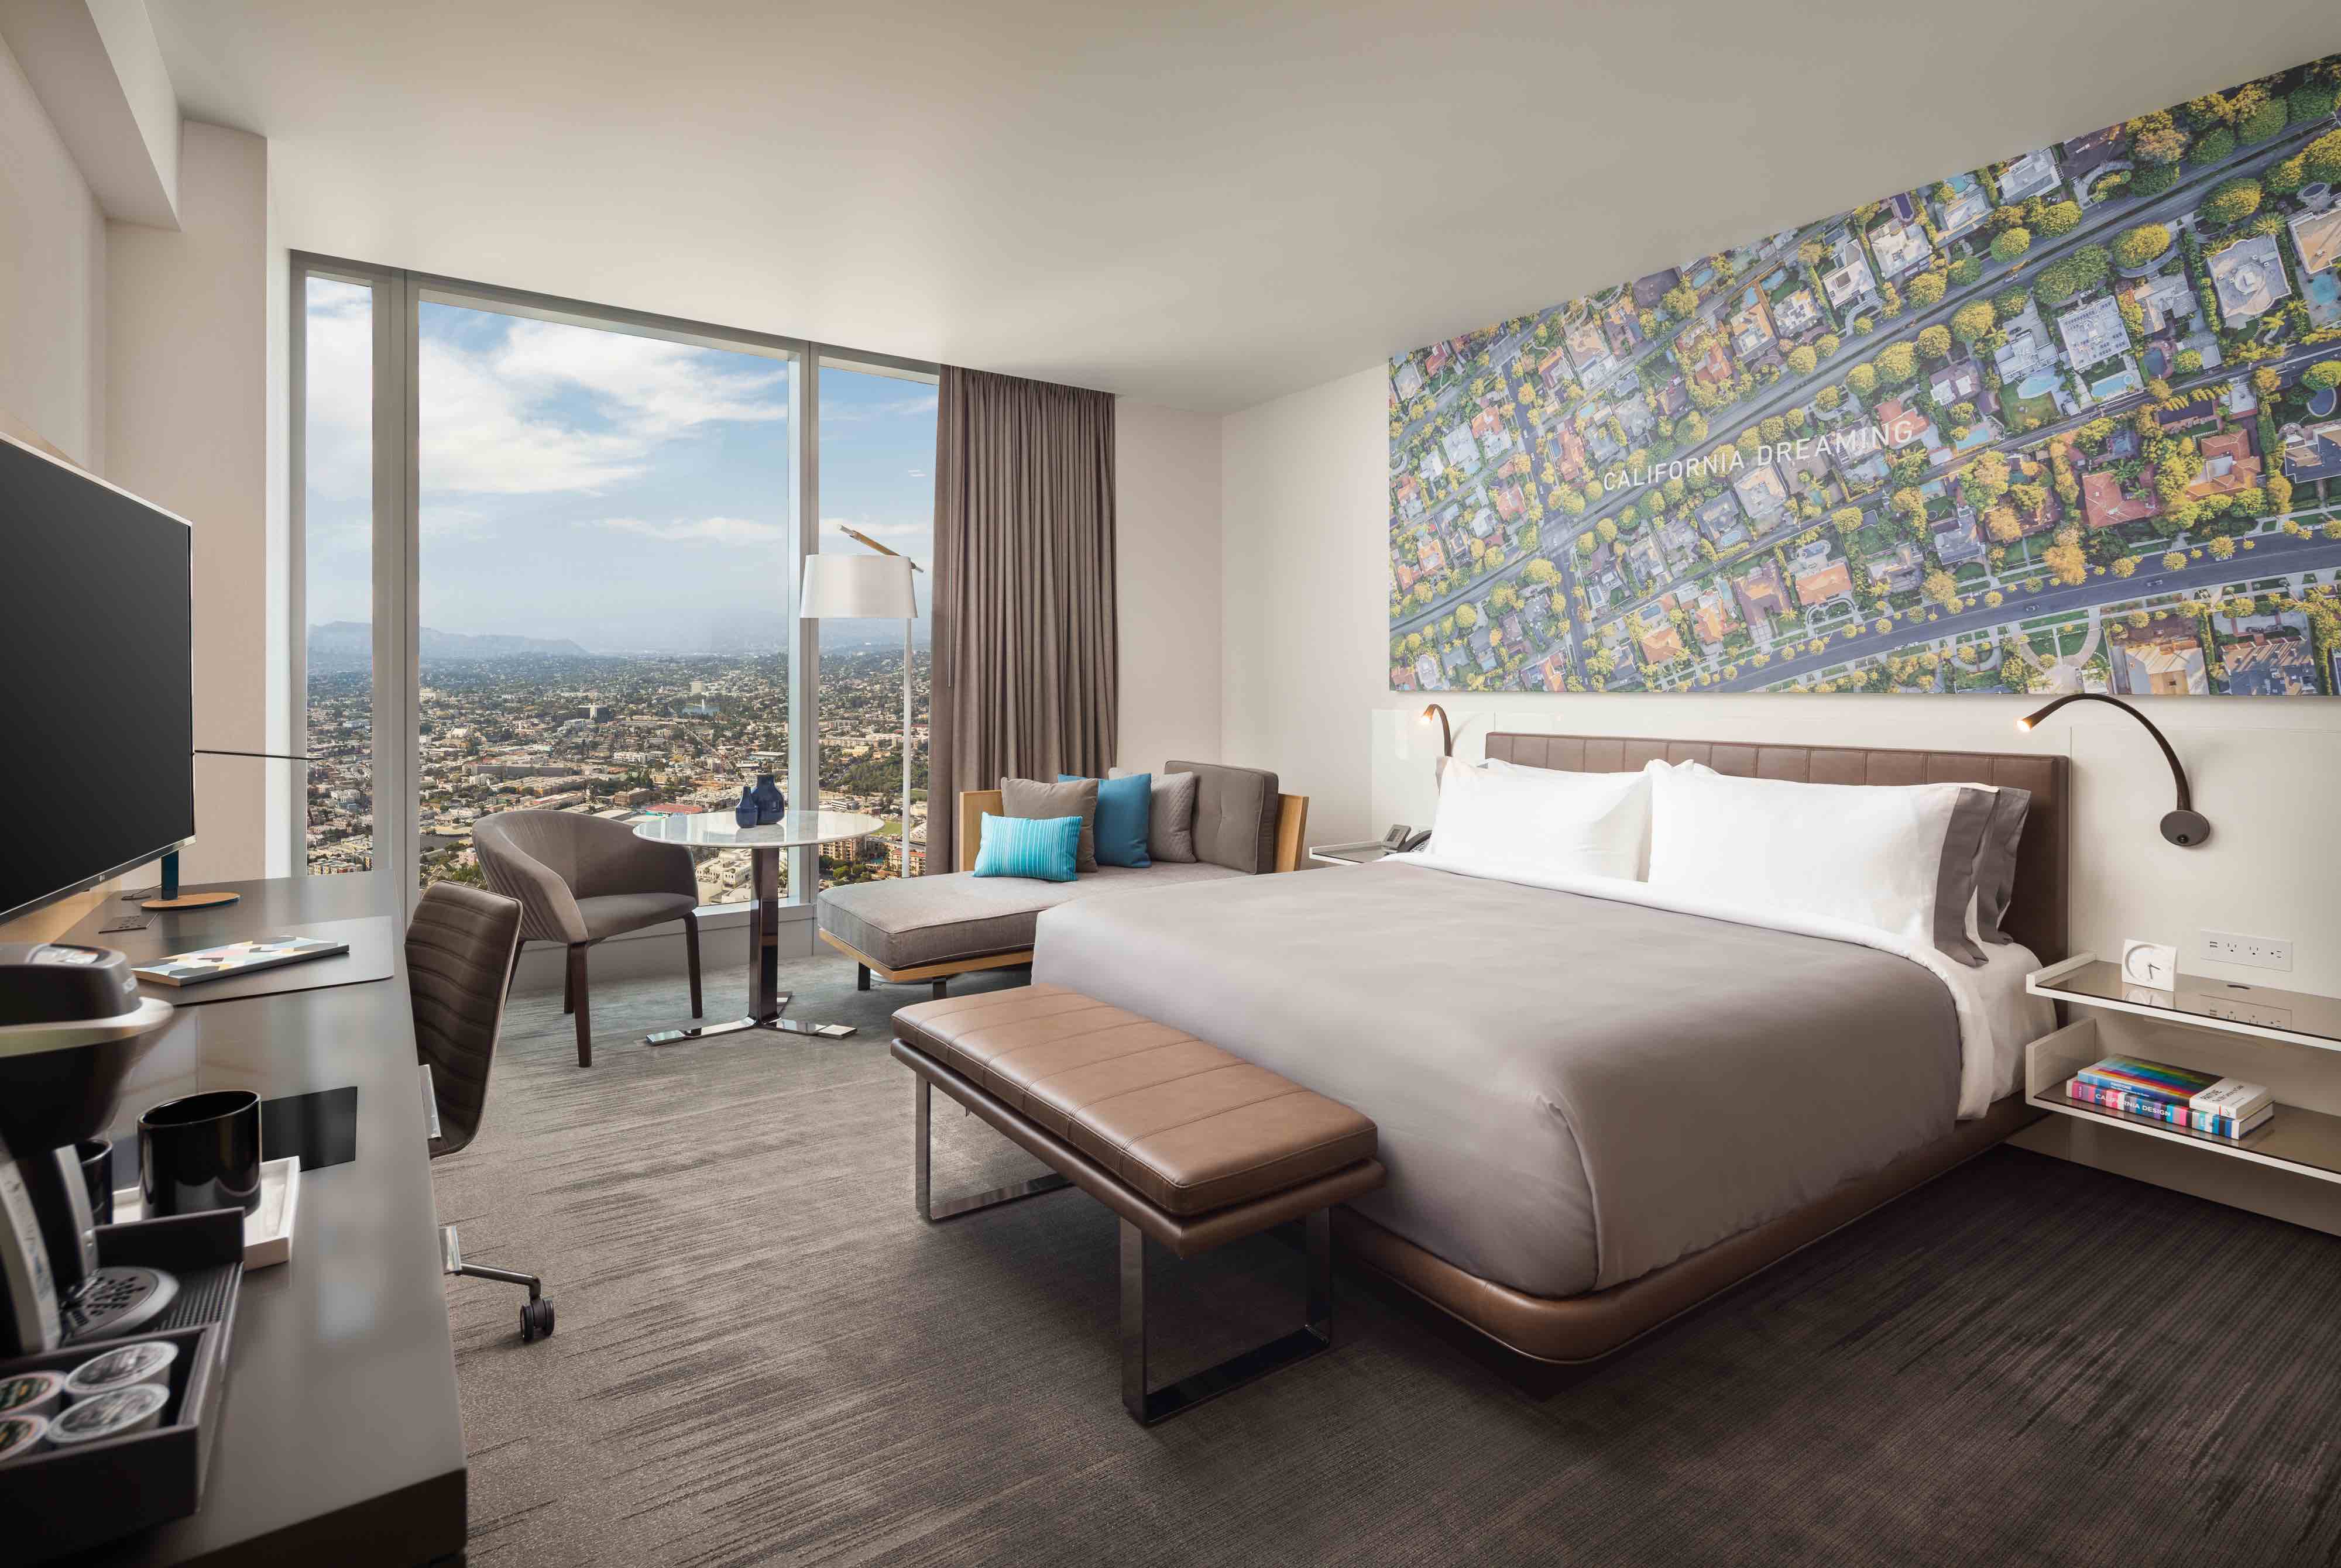 Hotels Los Angeles Hotels Best Deals